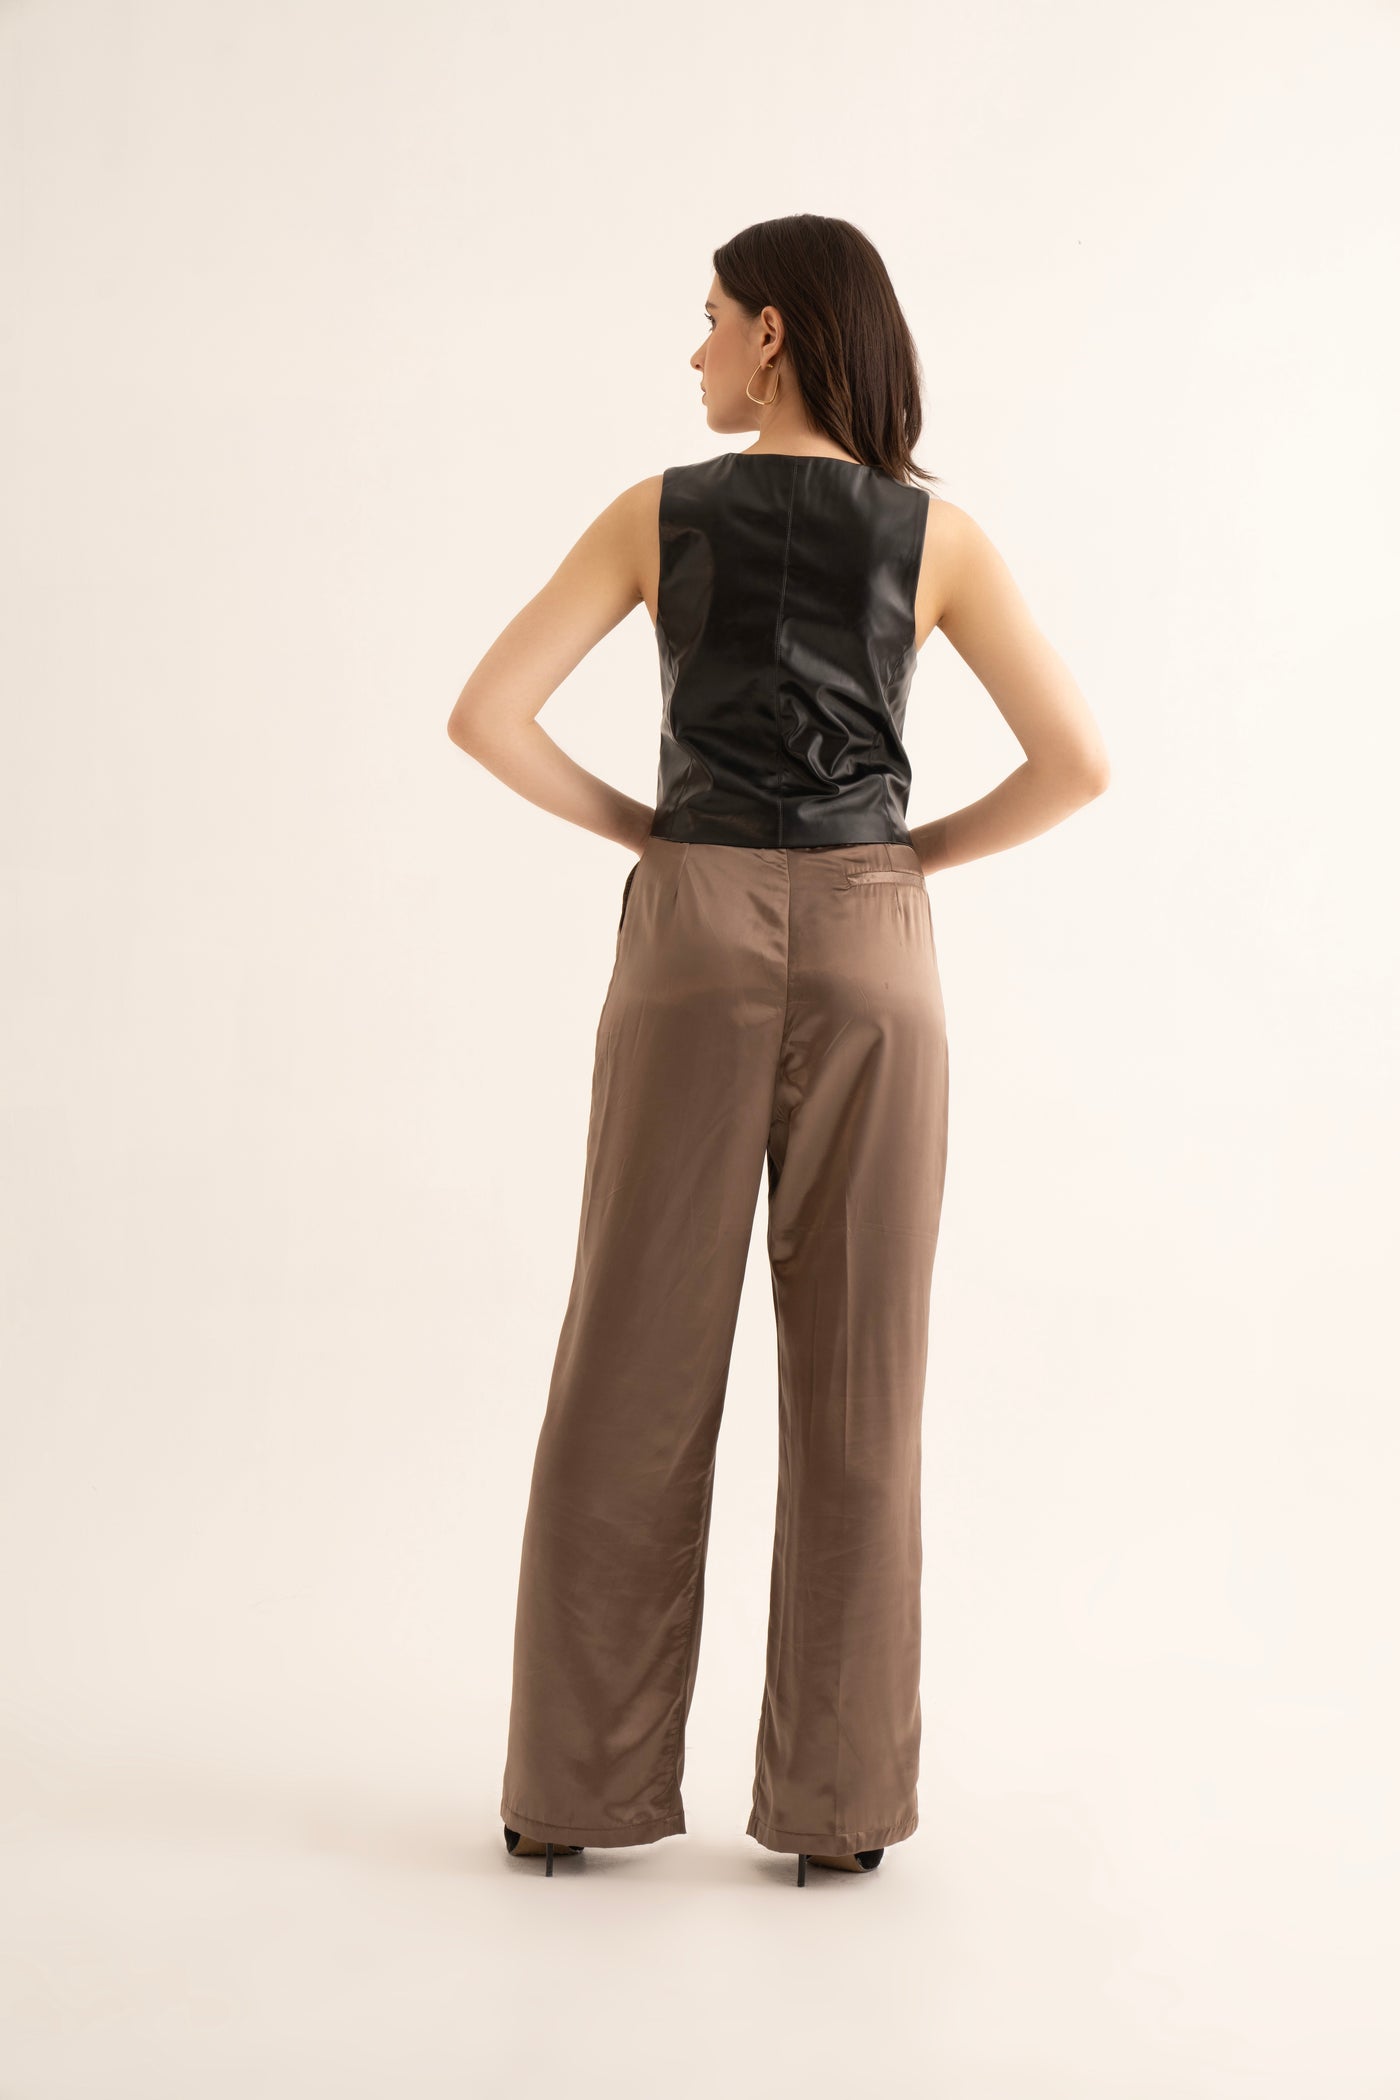 Black Faux Leather Waistcoat and Satin Korean Pants Co-ord